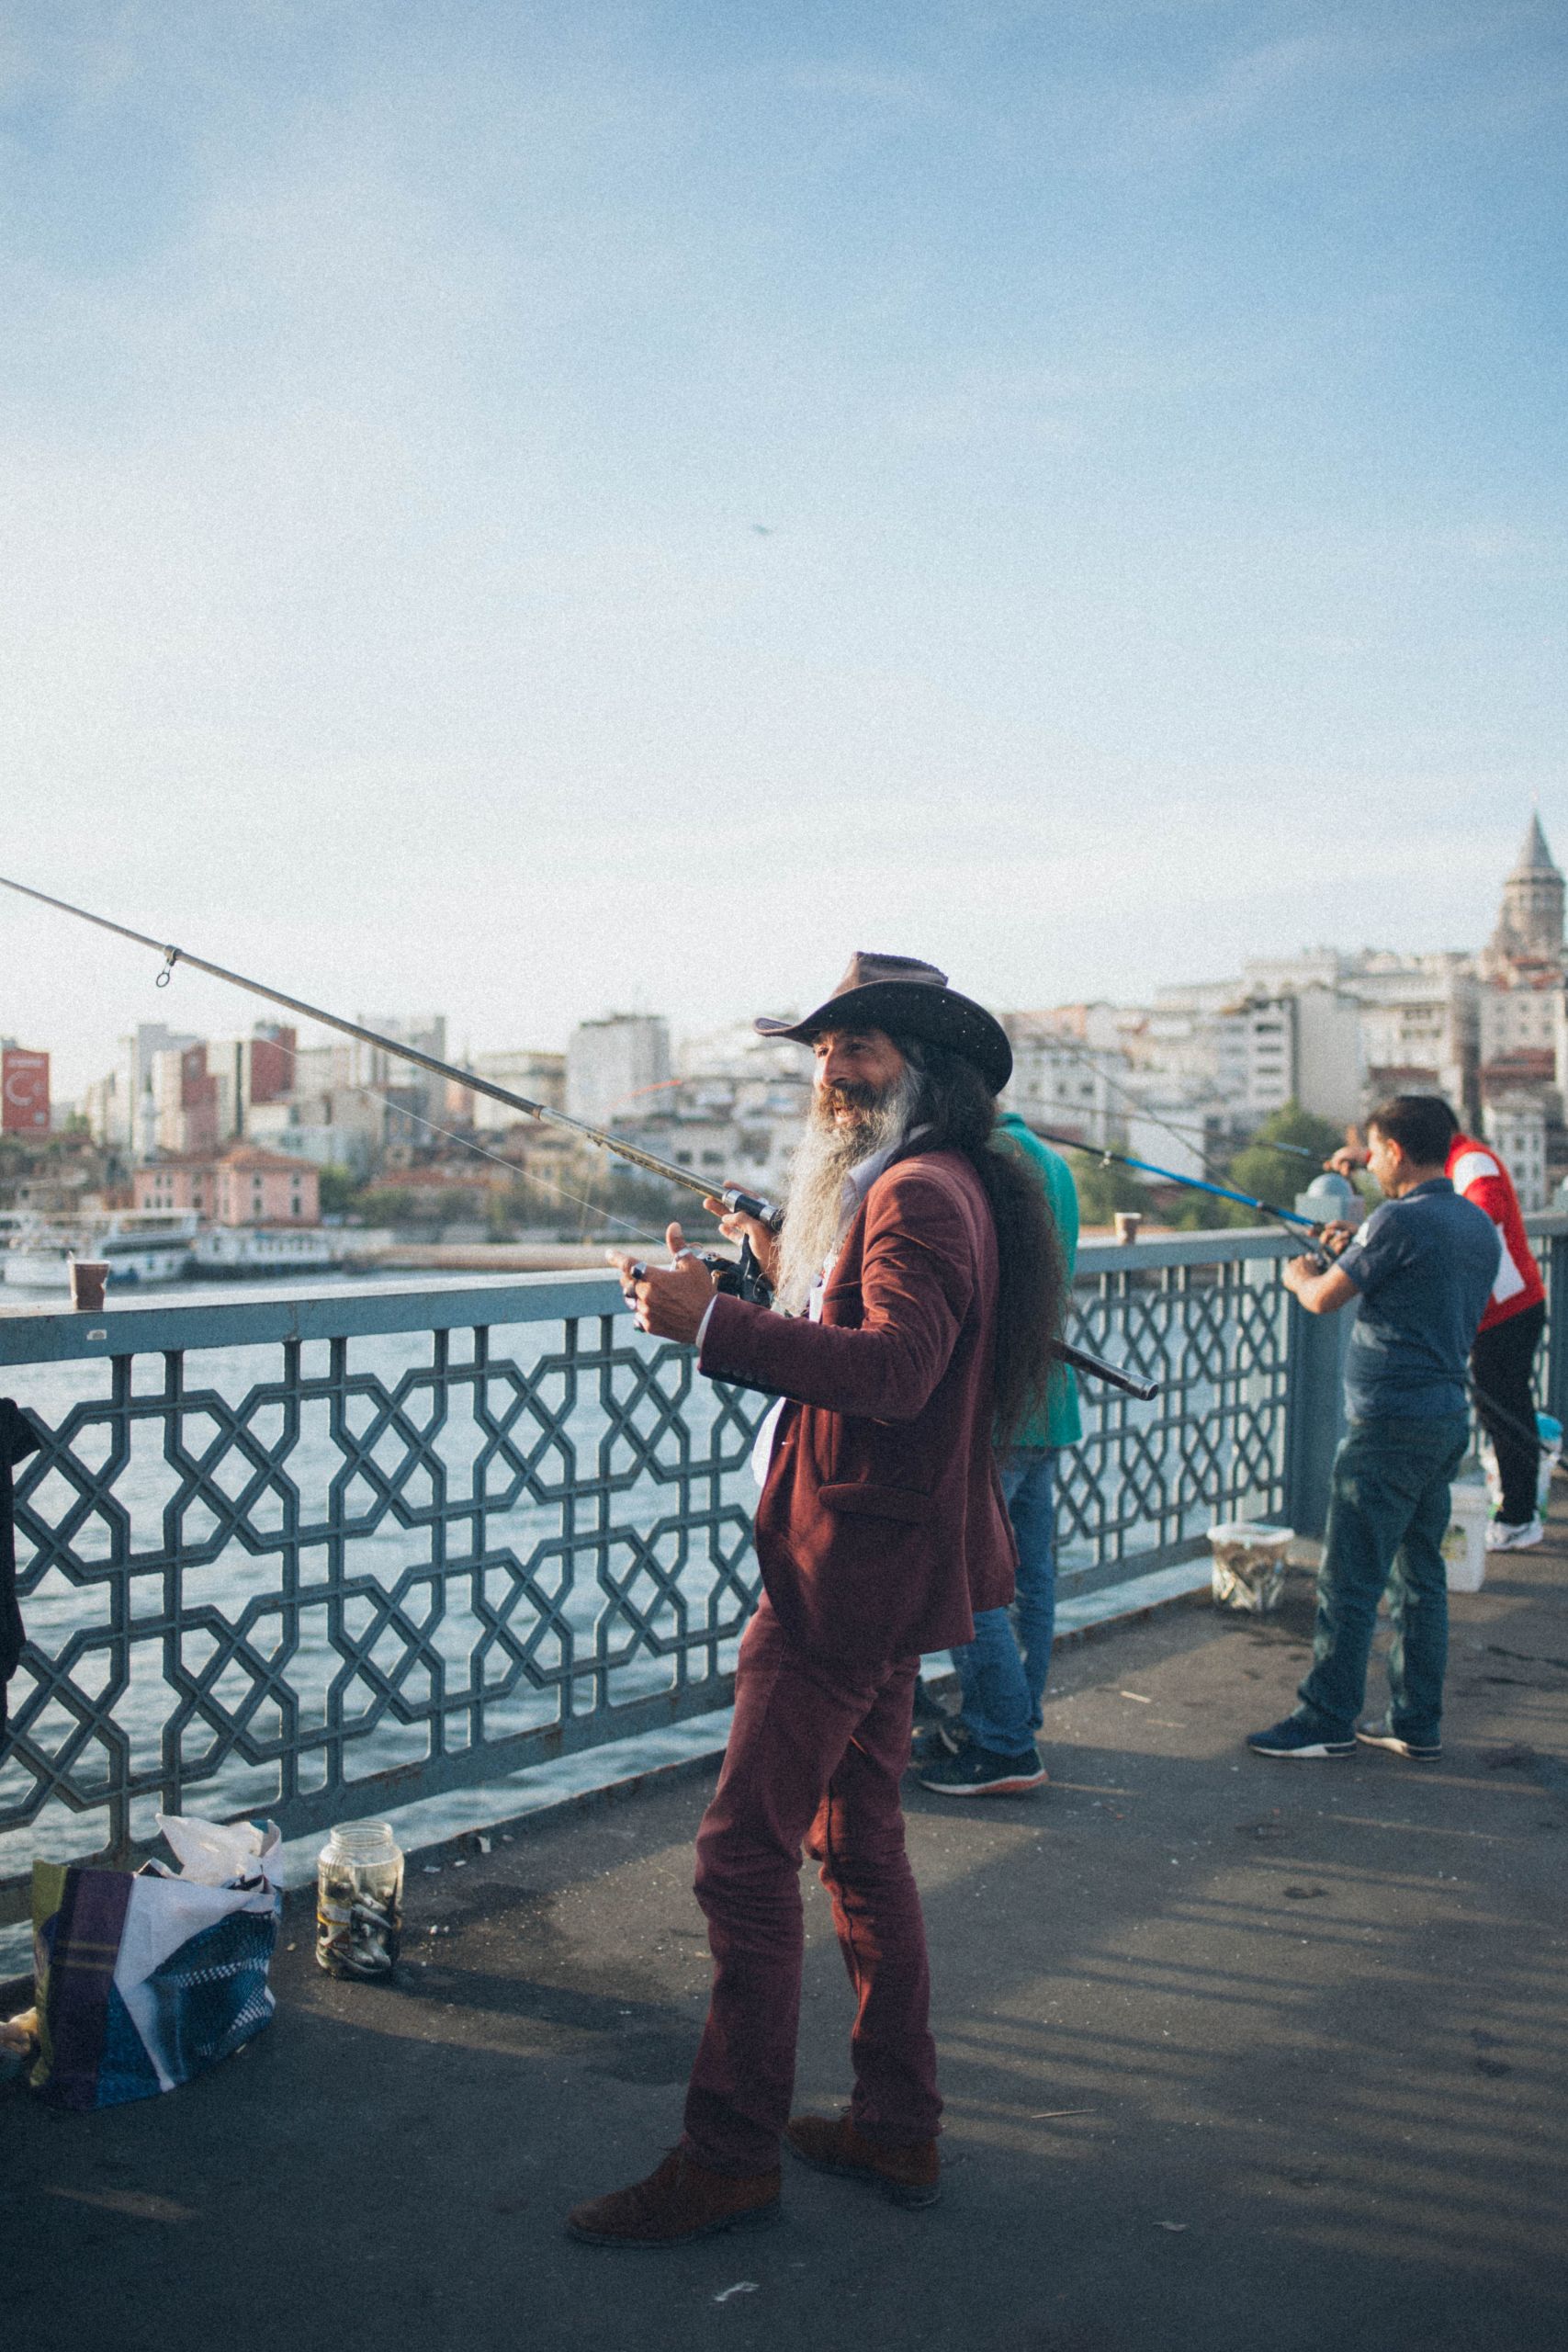 A man in a cowboy hat and red suit fishing on the bridge.